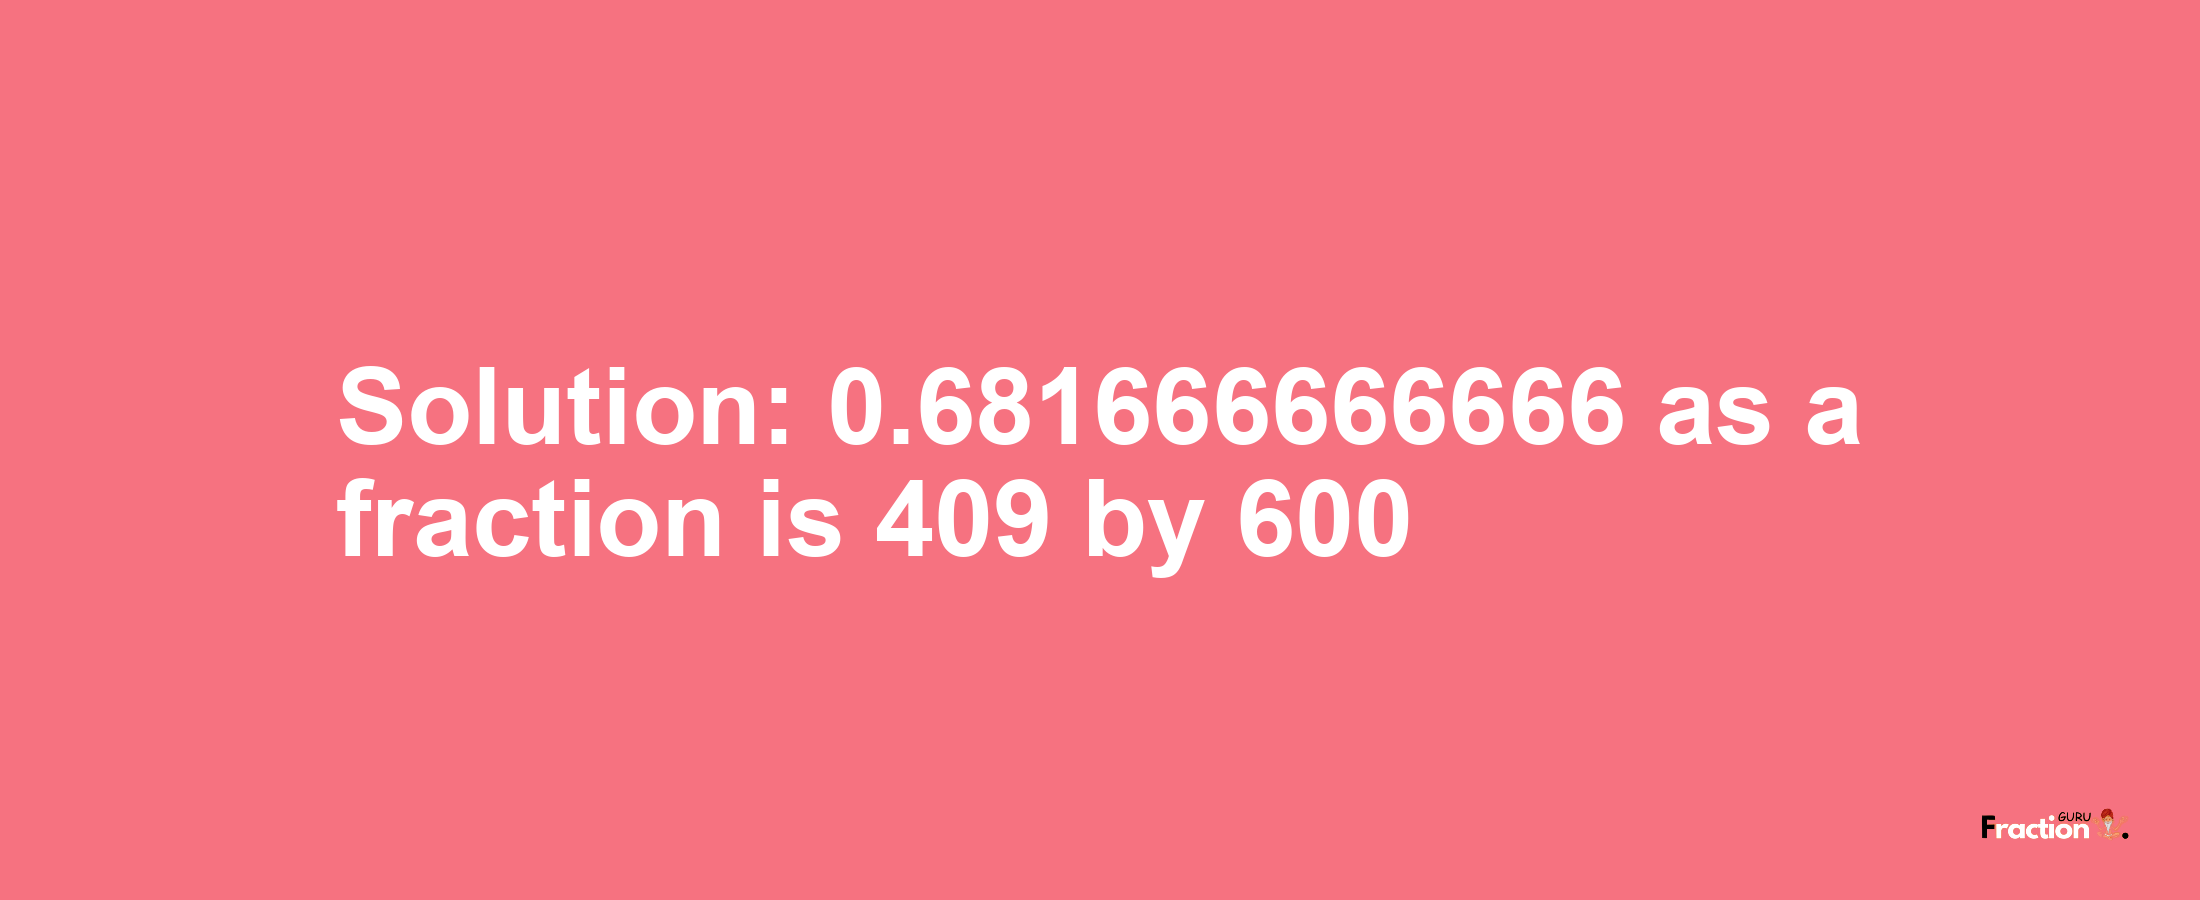 Solution:0.681666666666 as a fraction is 409/600